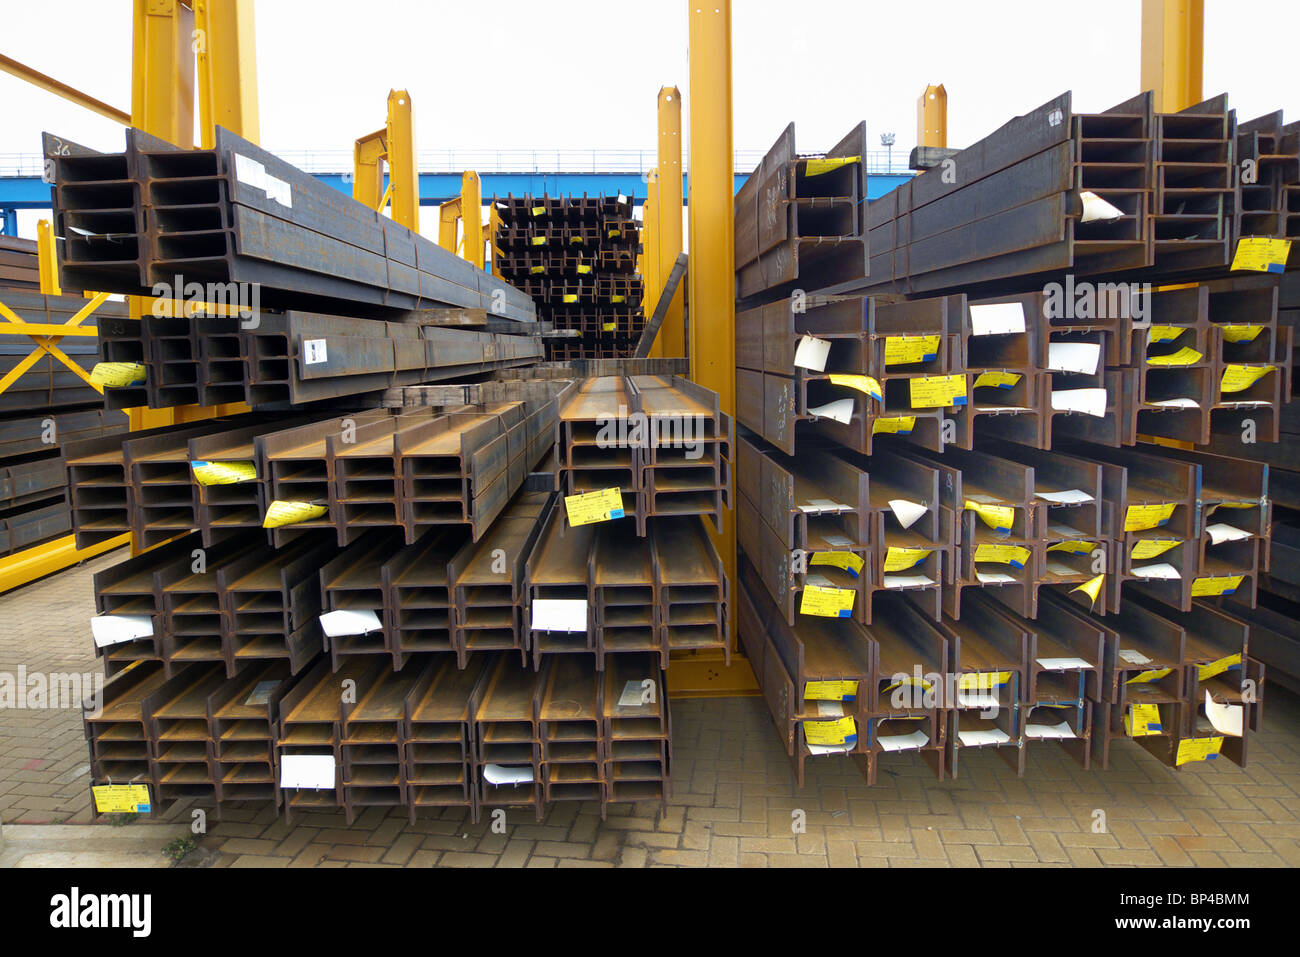 Imported steel girders stacked at the docks Stock Photo